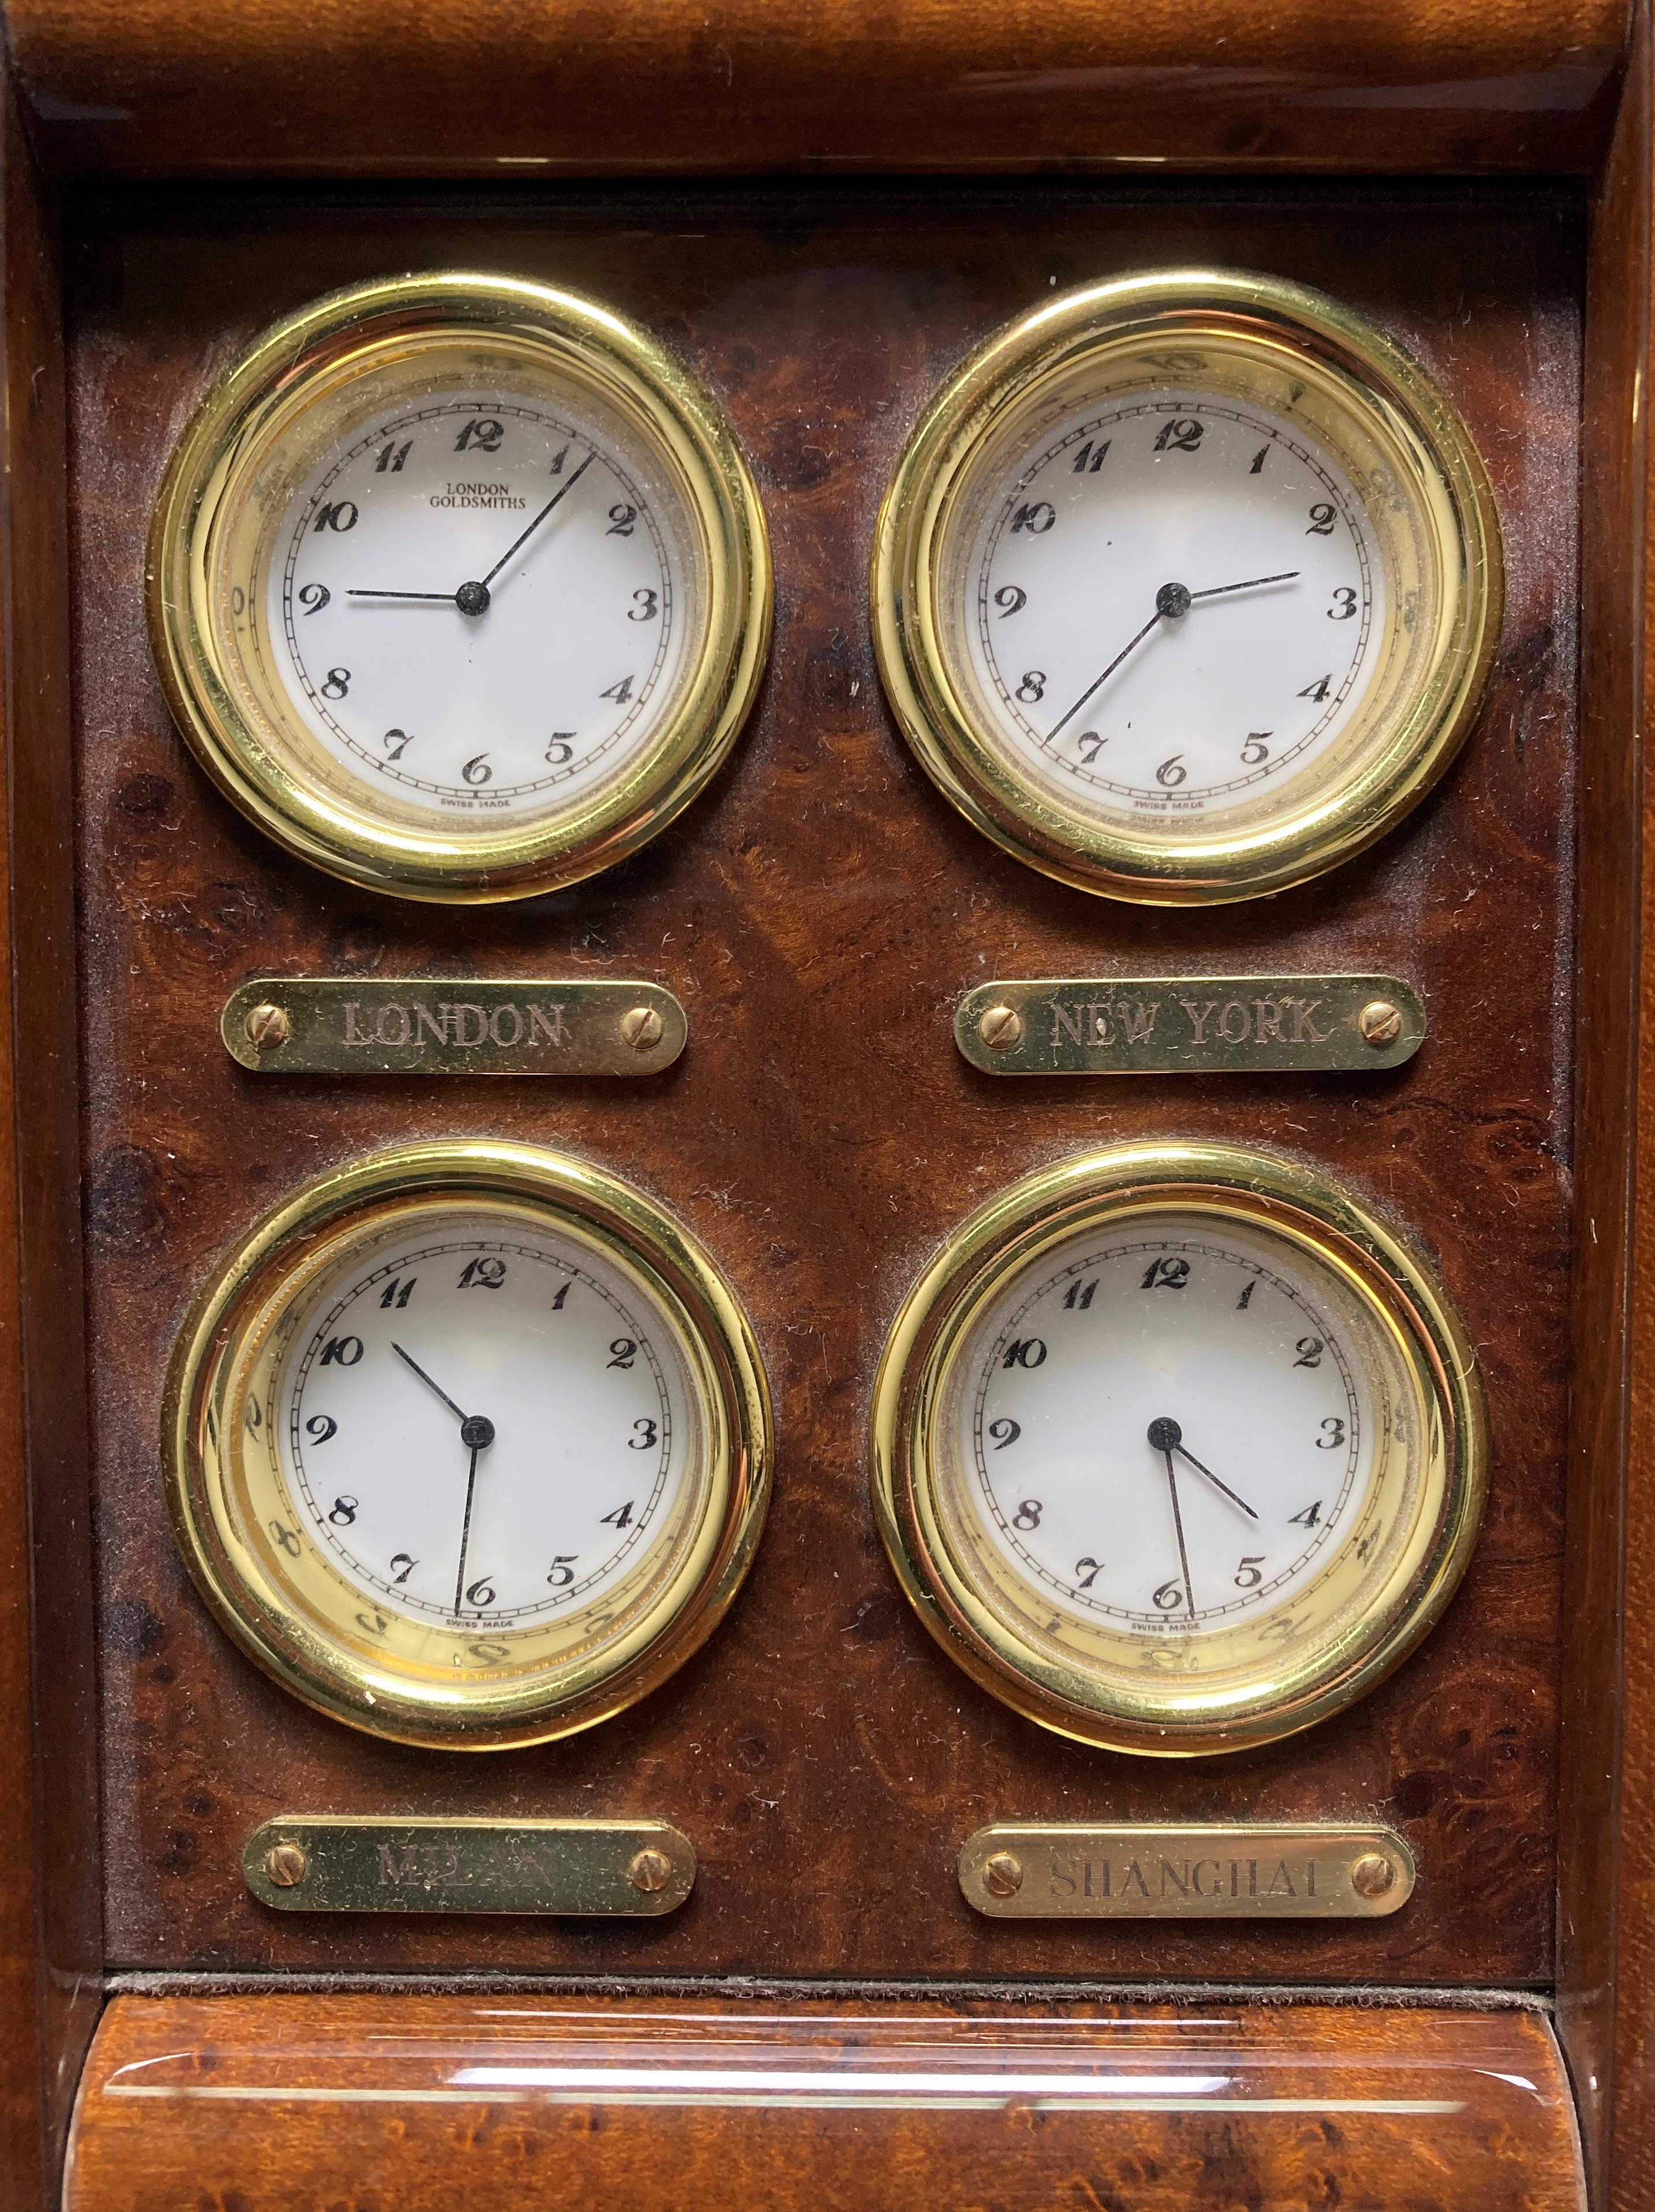 The London Goldsmiths Company world clock in a lacquered wood finish with time of London, New York, - Image 2 of 4